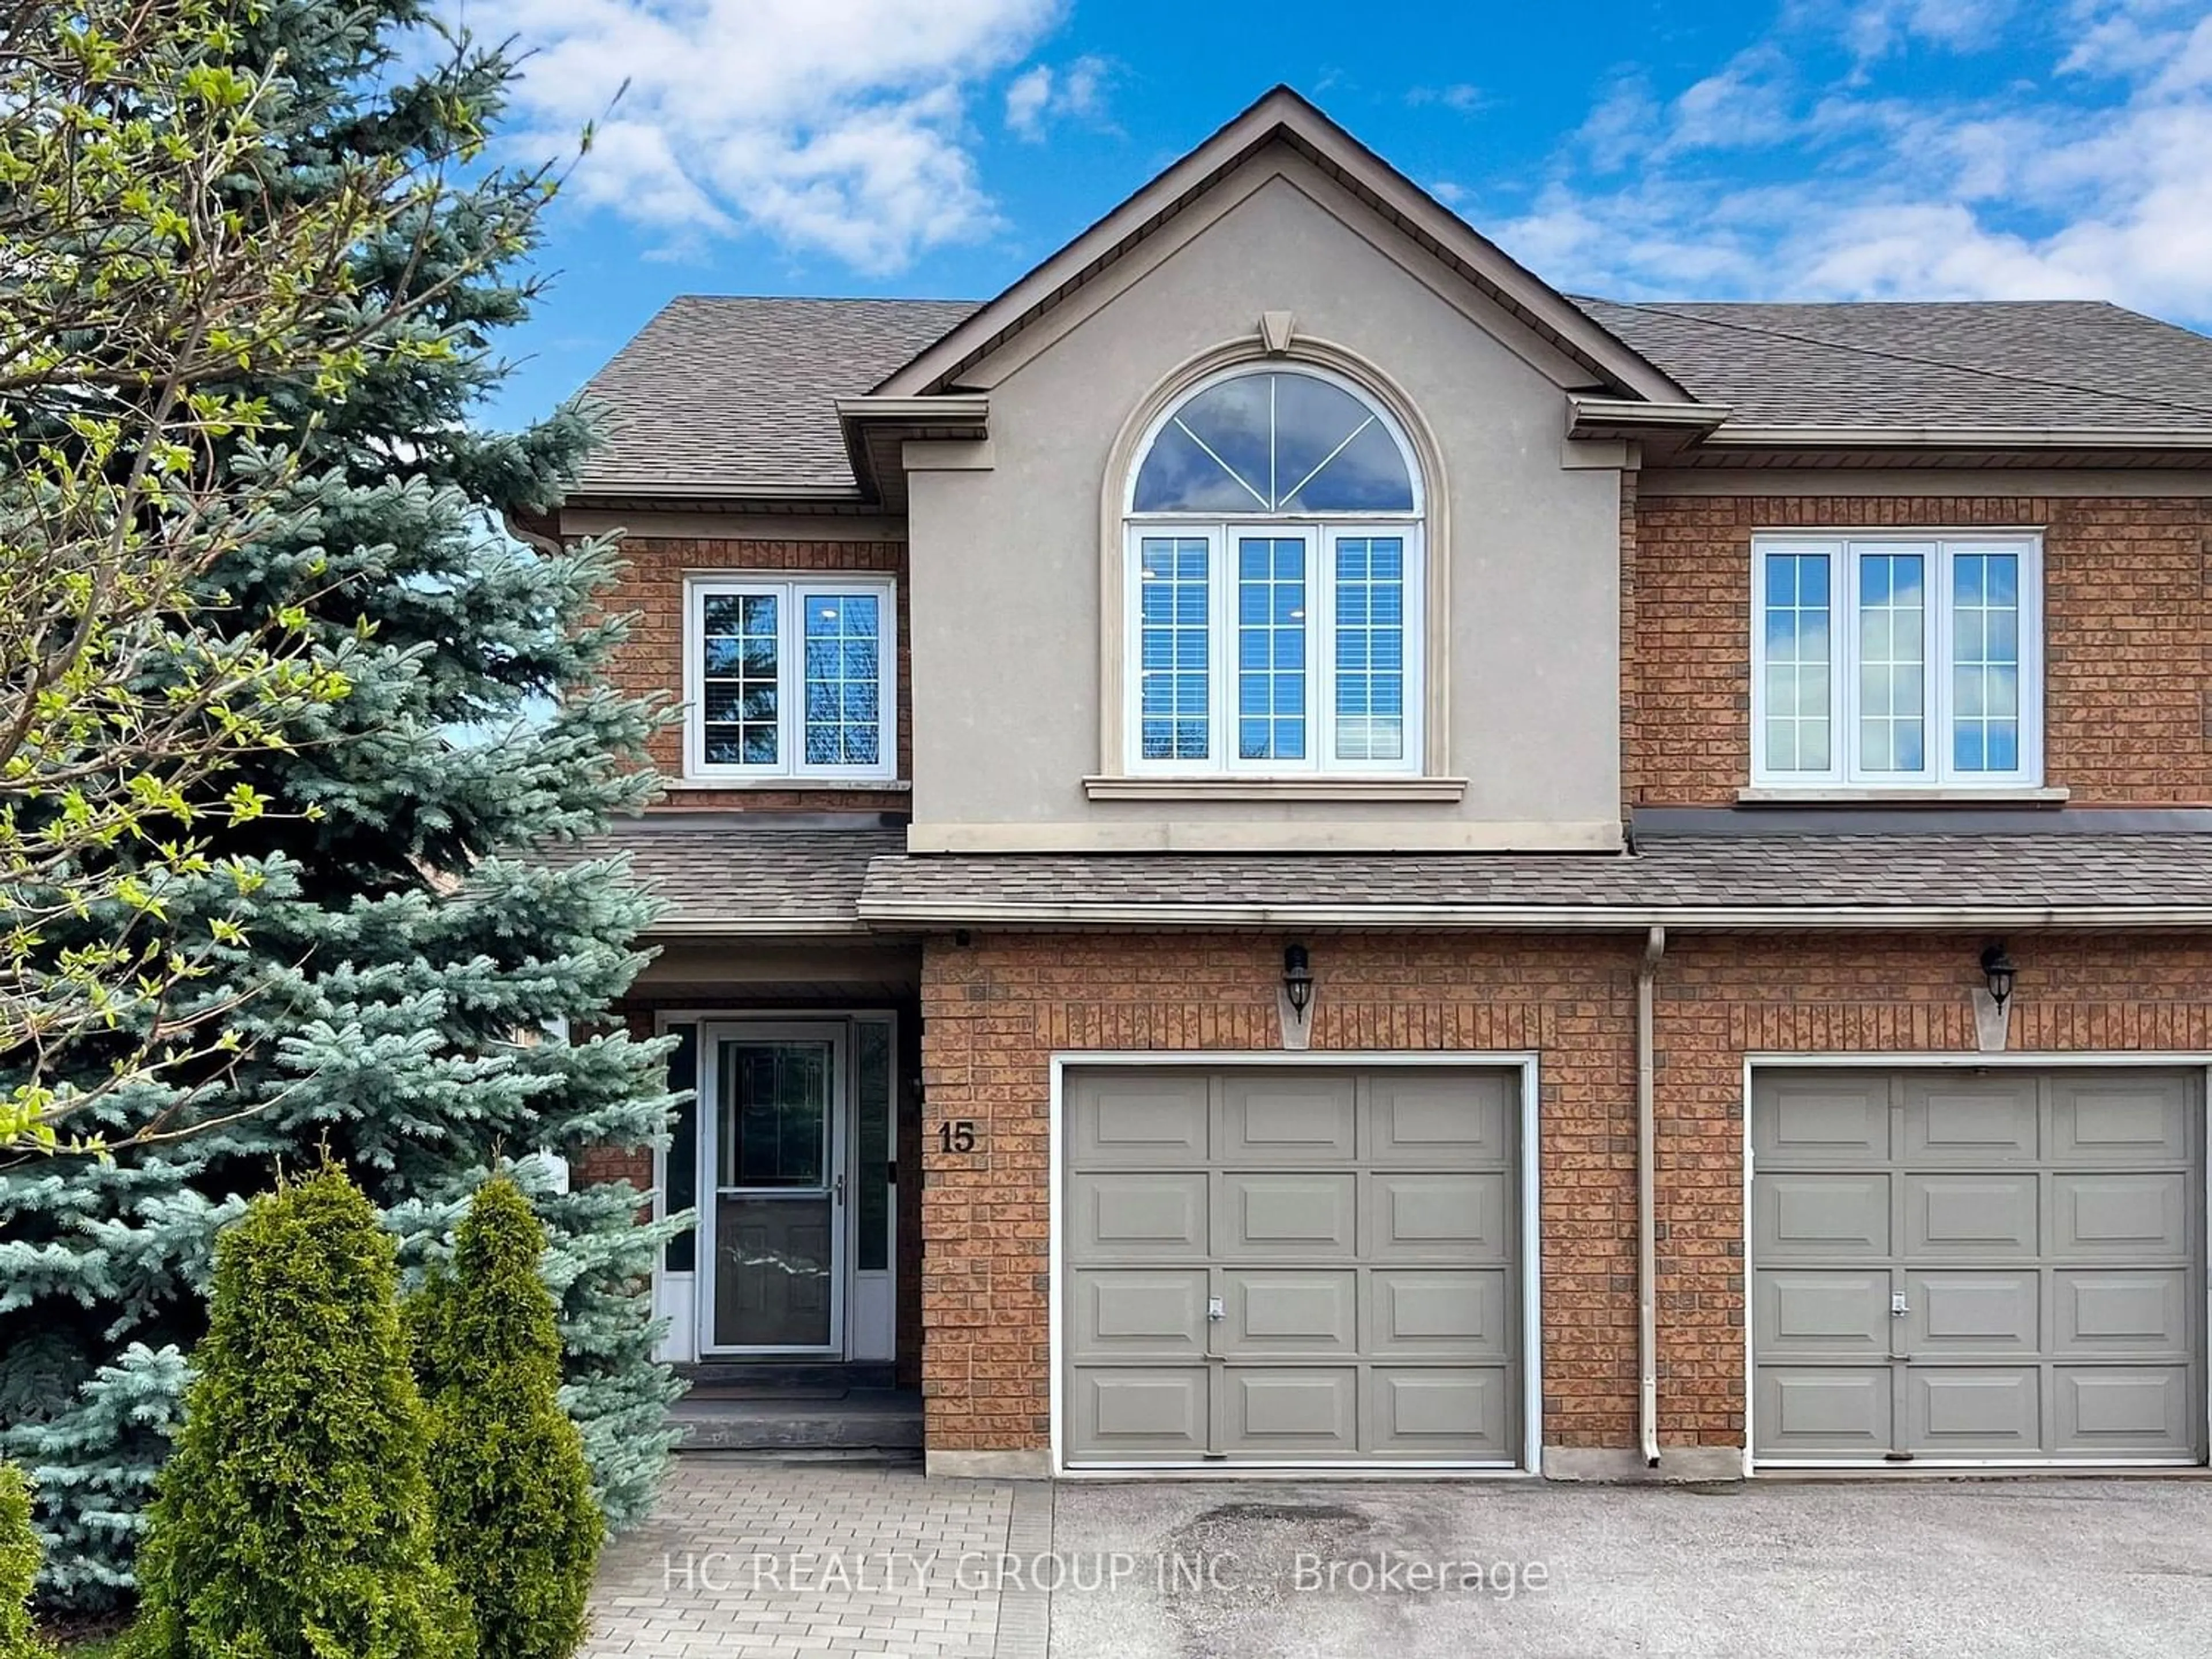 Home with brick exterior material for 15 Rockview Gdns, Vaughan Ontario L4K 4W4